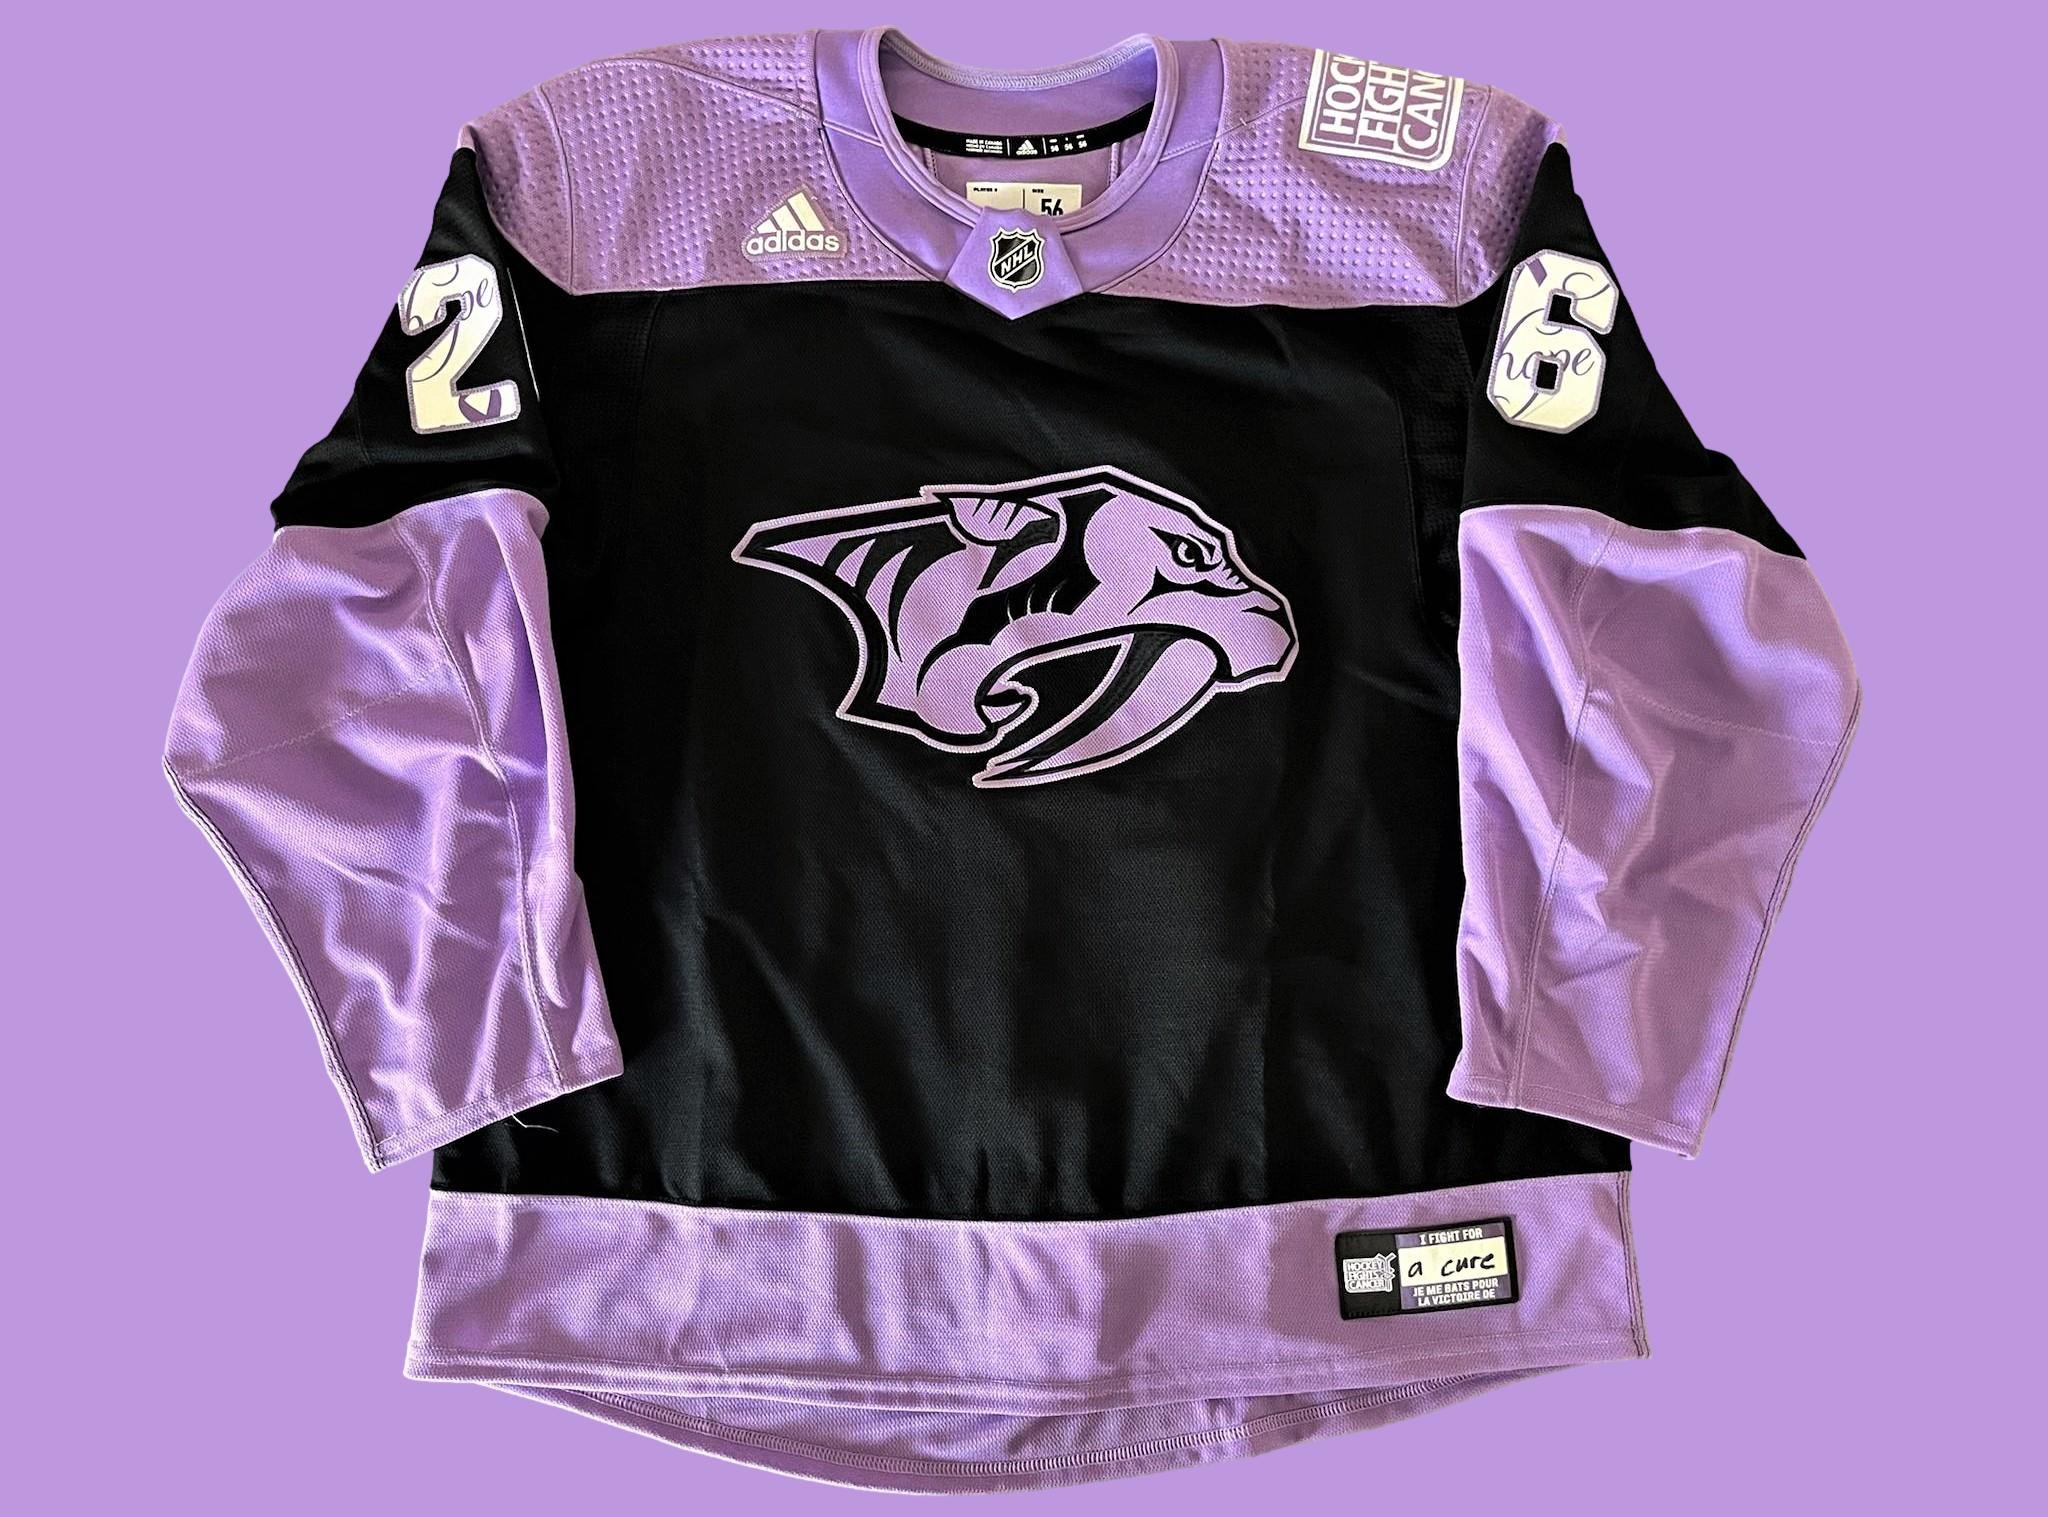 Thompson Fueled by Different Type of Army for Hockey Fights Cancer Night